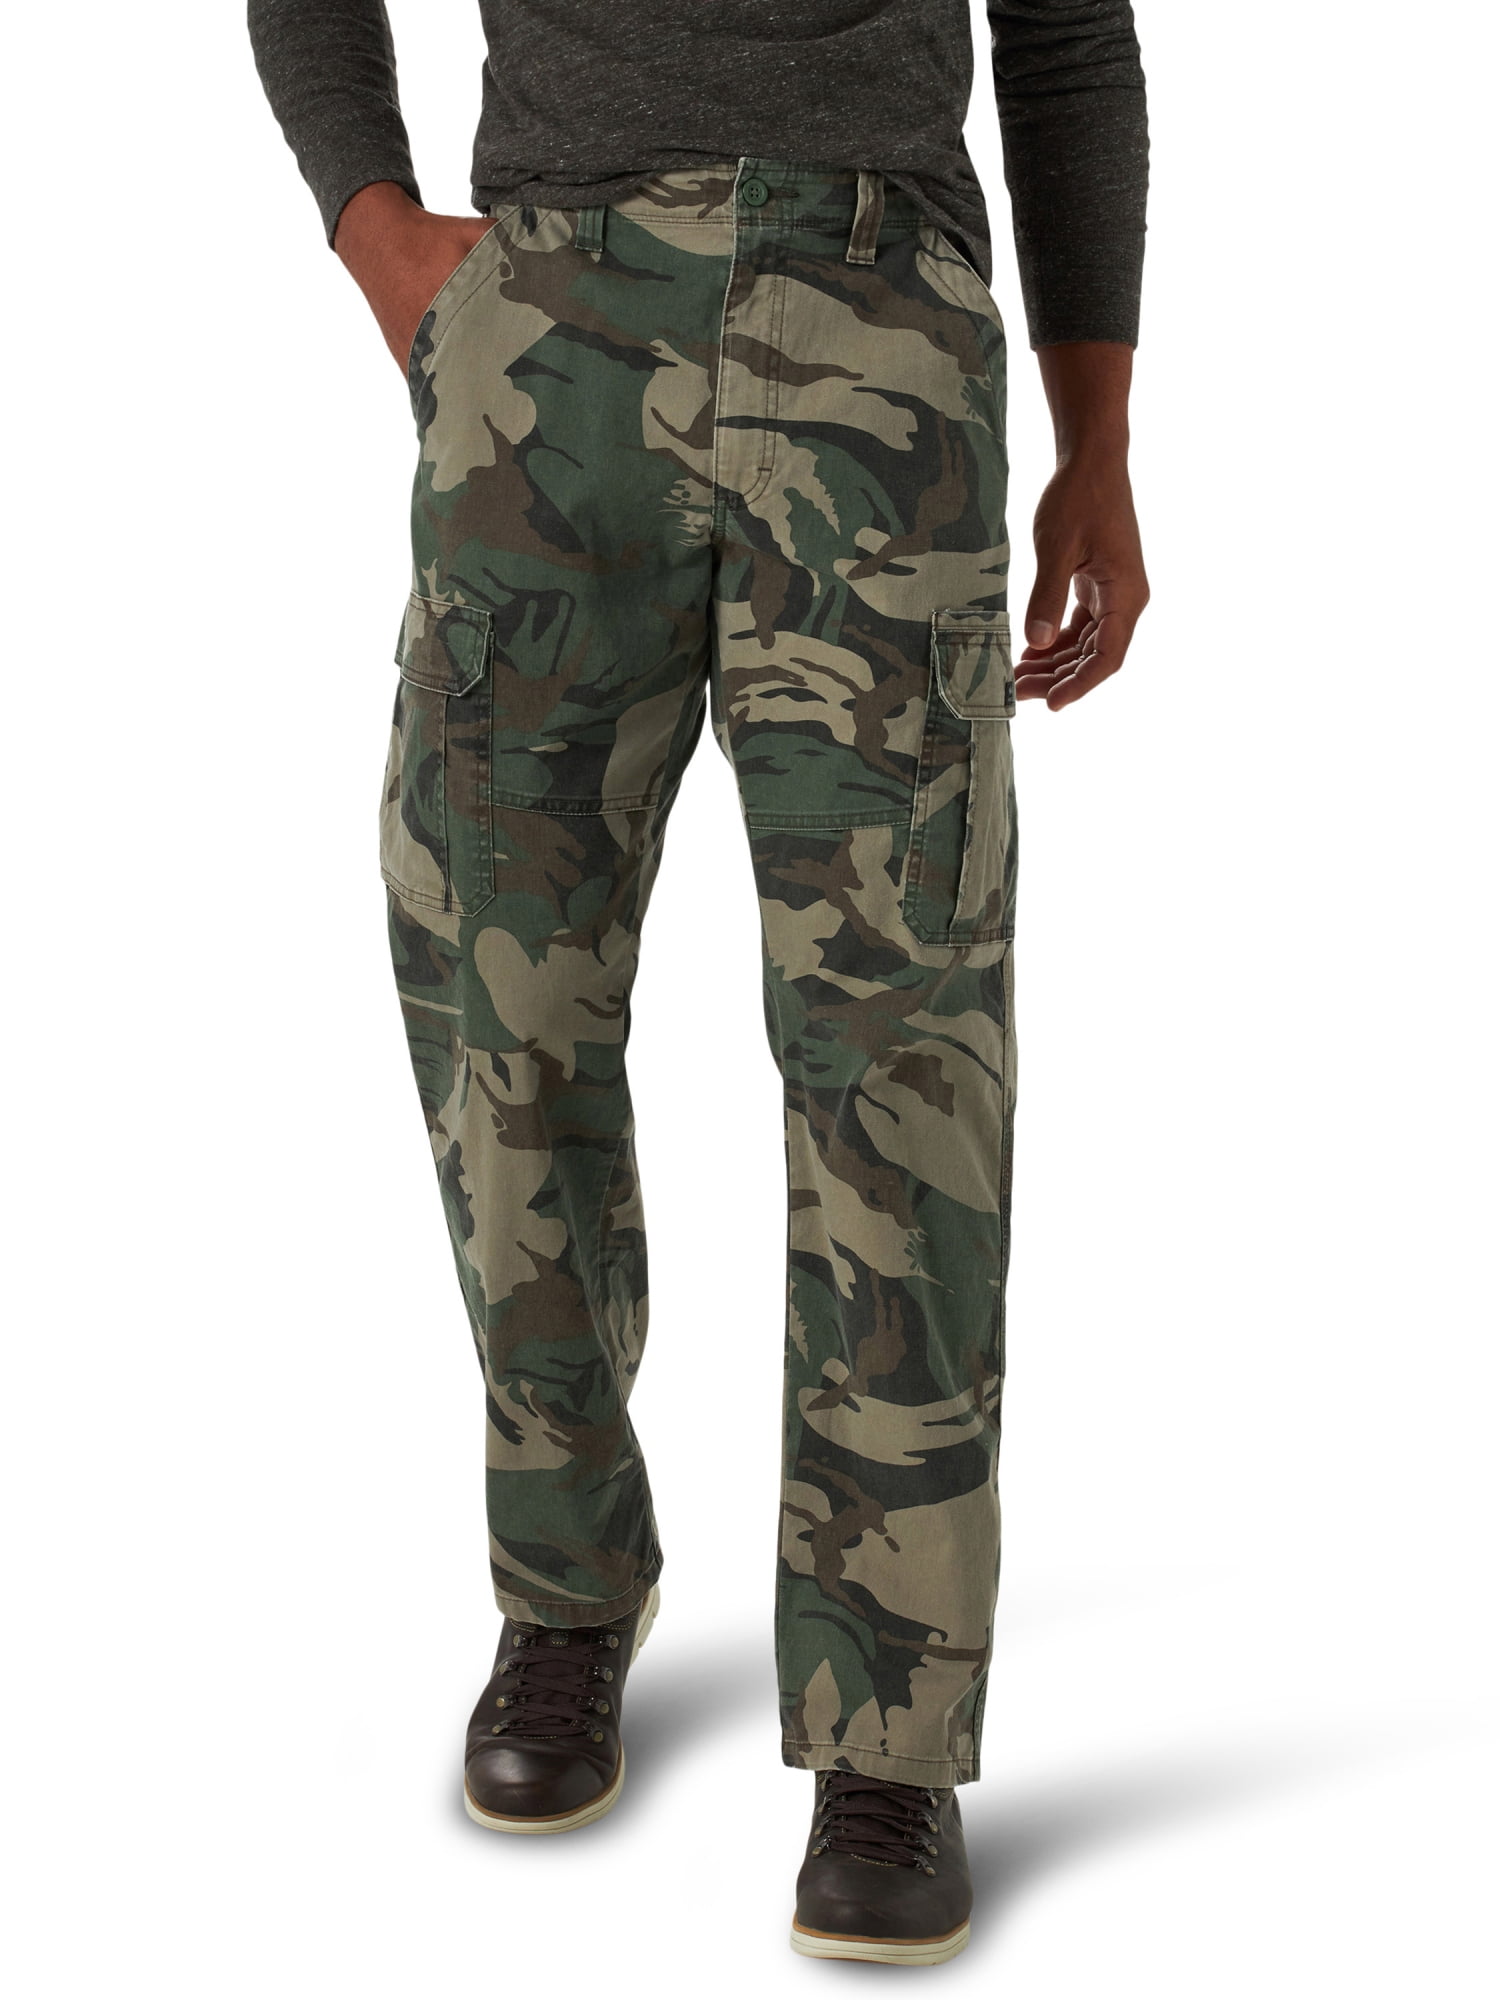 Mens Army Camo Winter Fleece Lined Work Trousers Elasticated Cargo Combat Pants